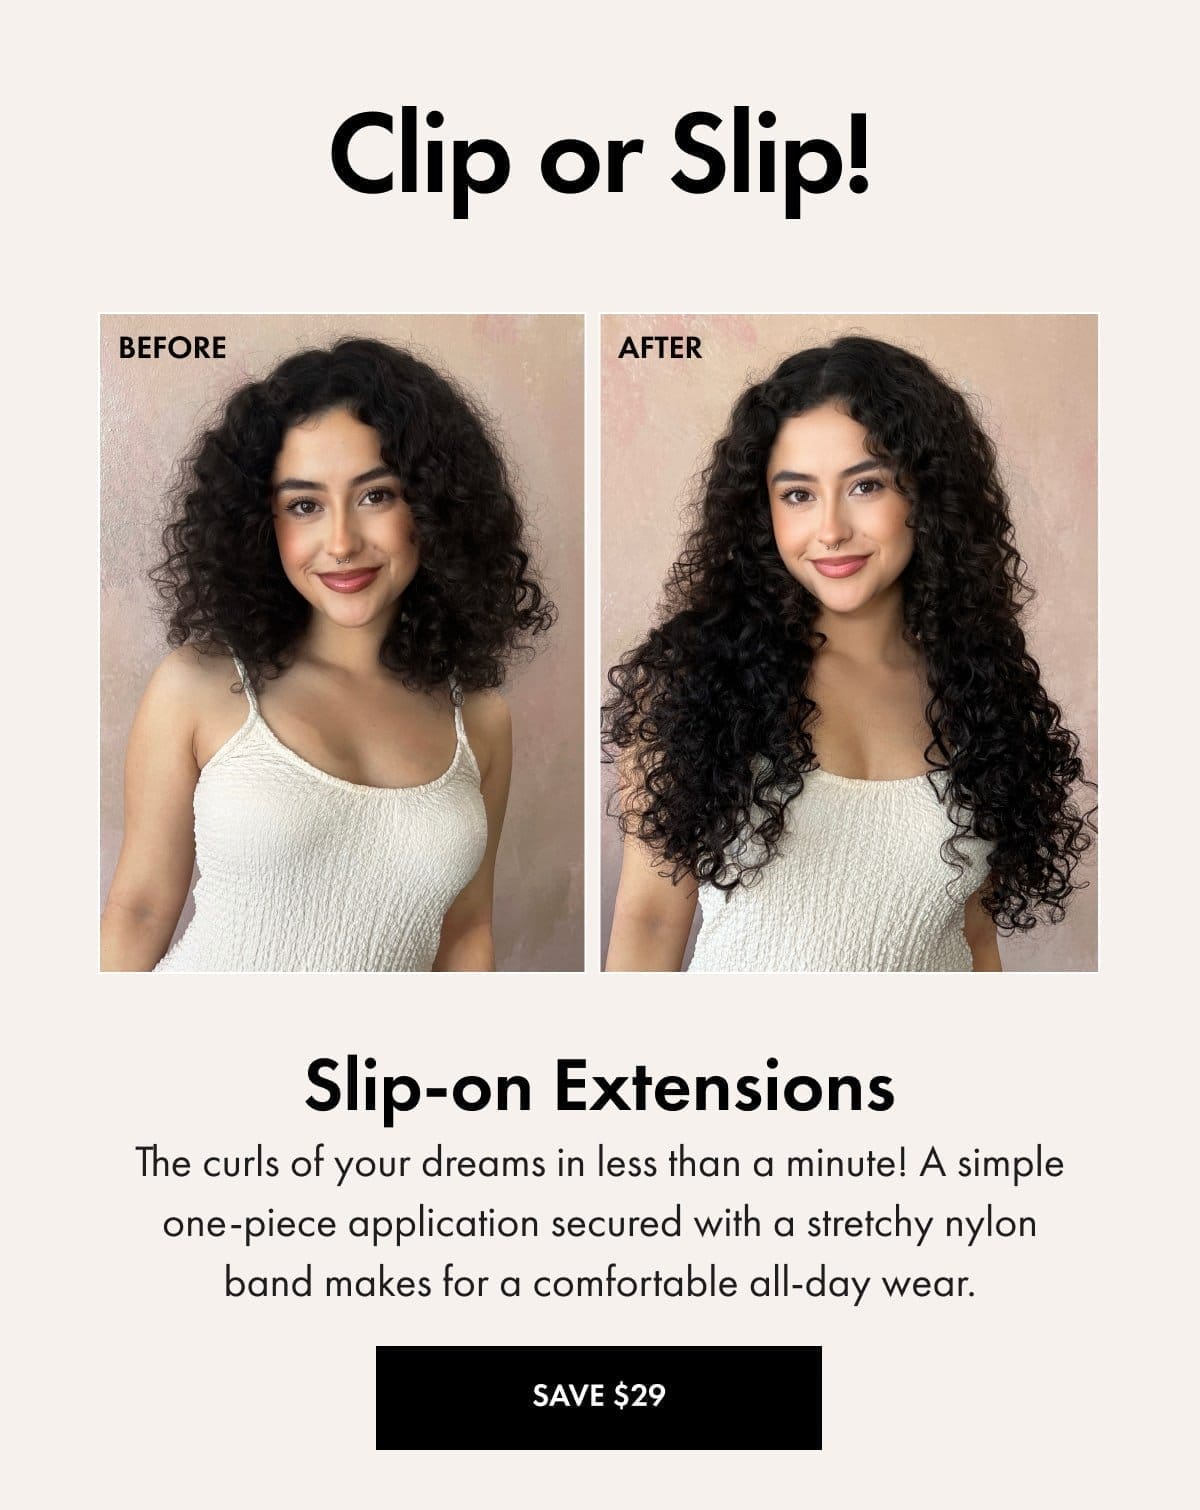 Slip-on Extensions: The curls of your dreams in less than a minute. A simple one-piece application secure witha. stretchy nylon band makes for a comfortable all-day wear. SAVE \\$29 WITH CODE: SAVE29